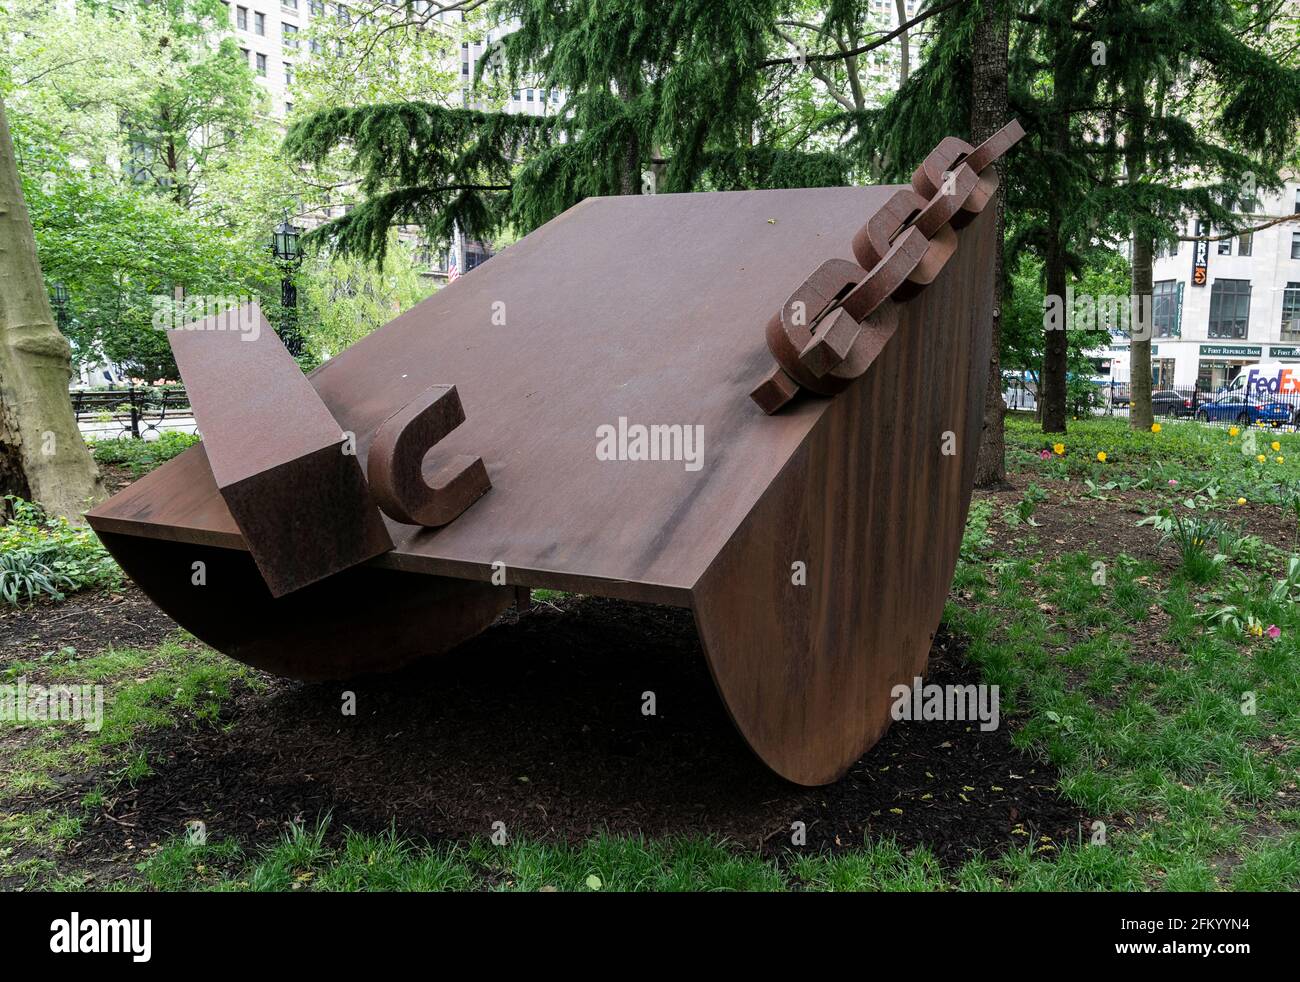 New York, NY - May 4, 2021: Unveiling of sculptures Brighter Days by Melvin Edwards at CIty Hall Park sponsored by Public Art Fund Stock Photo